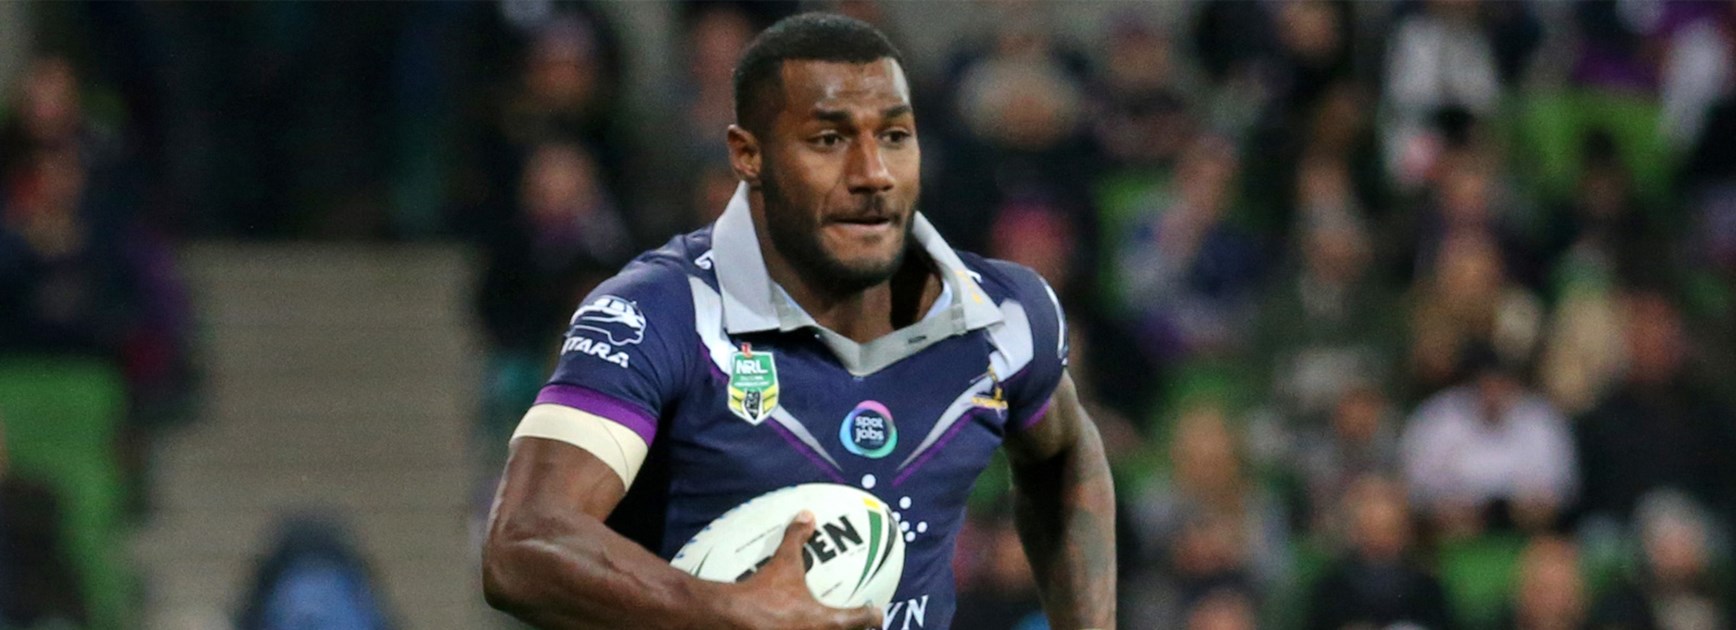 Storm winger Suliasi Vunivalu runs clear against the Roosters in Round 20.